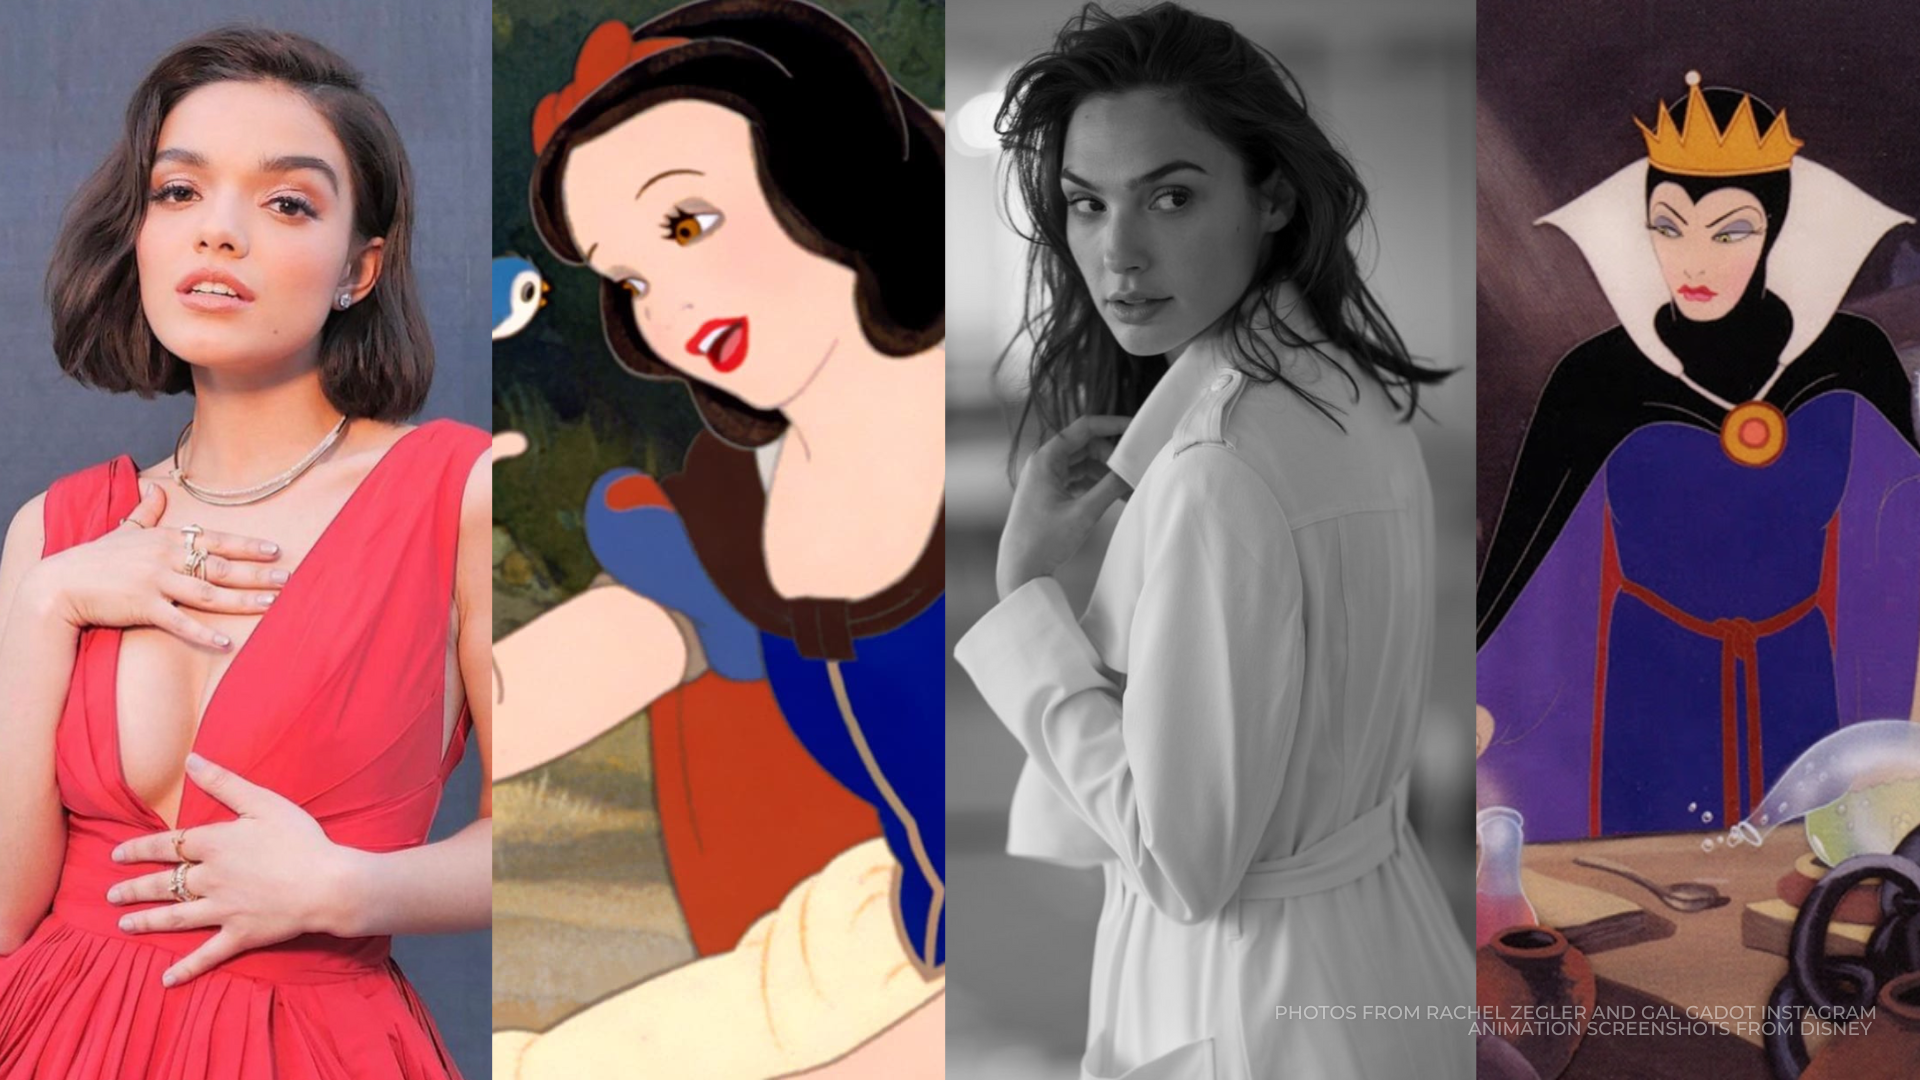 Rachel Zegler and Gal Gadot to Star in Snow White LiveAction When In